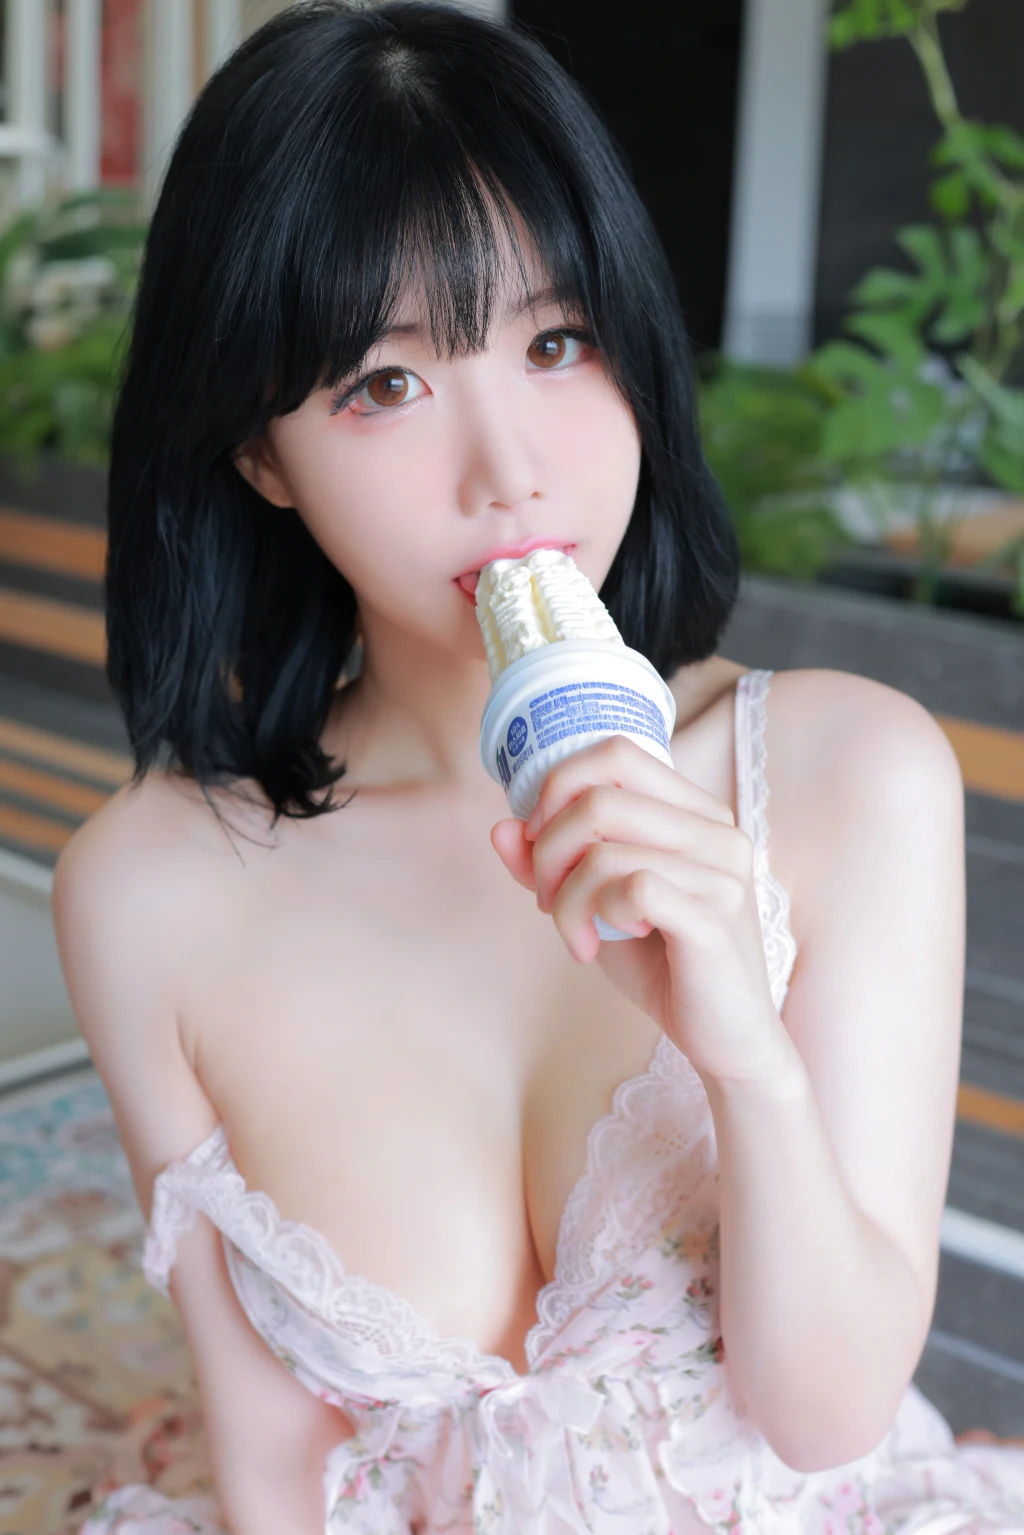 [Patreon] Addielyn (에디린) - Morning Classes July (118 pic + 2 videos)